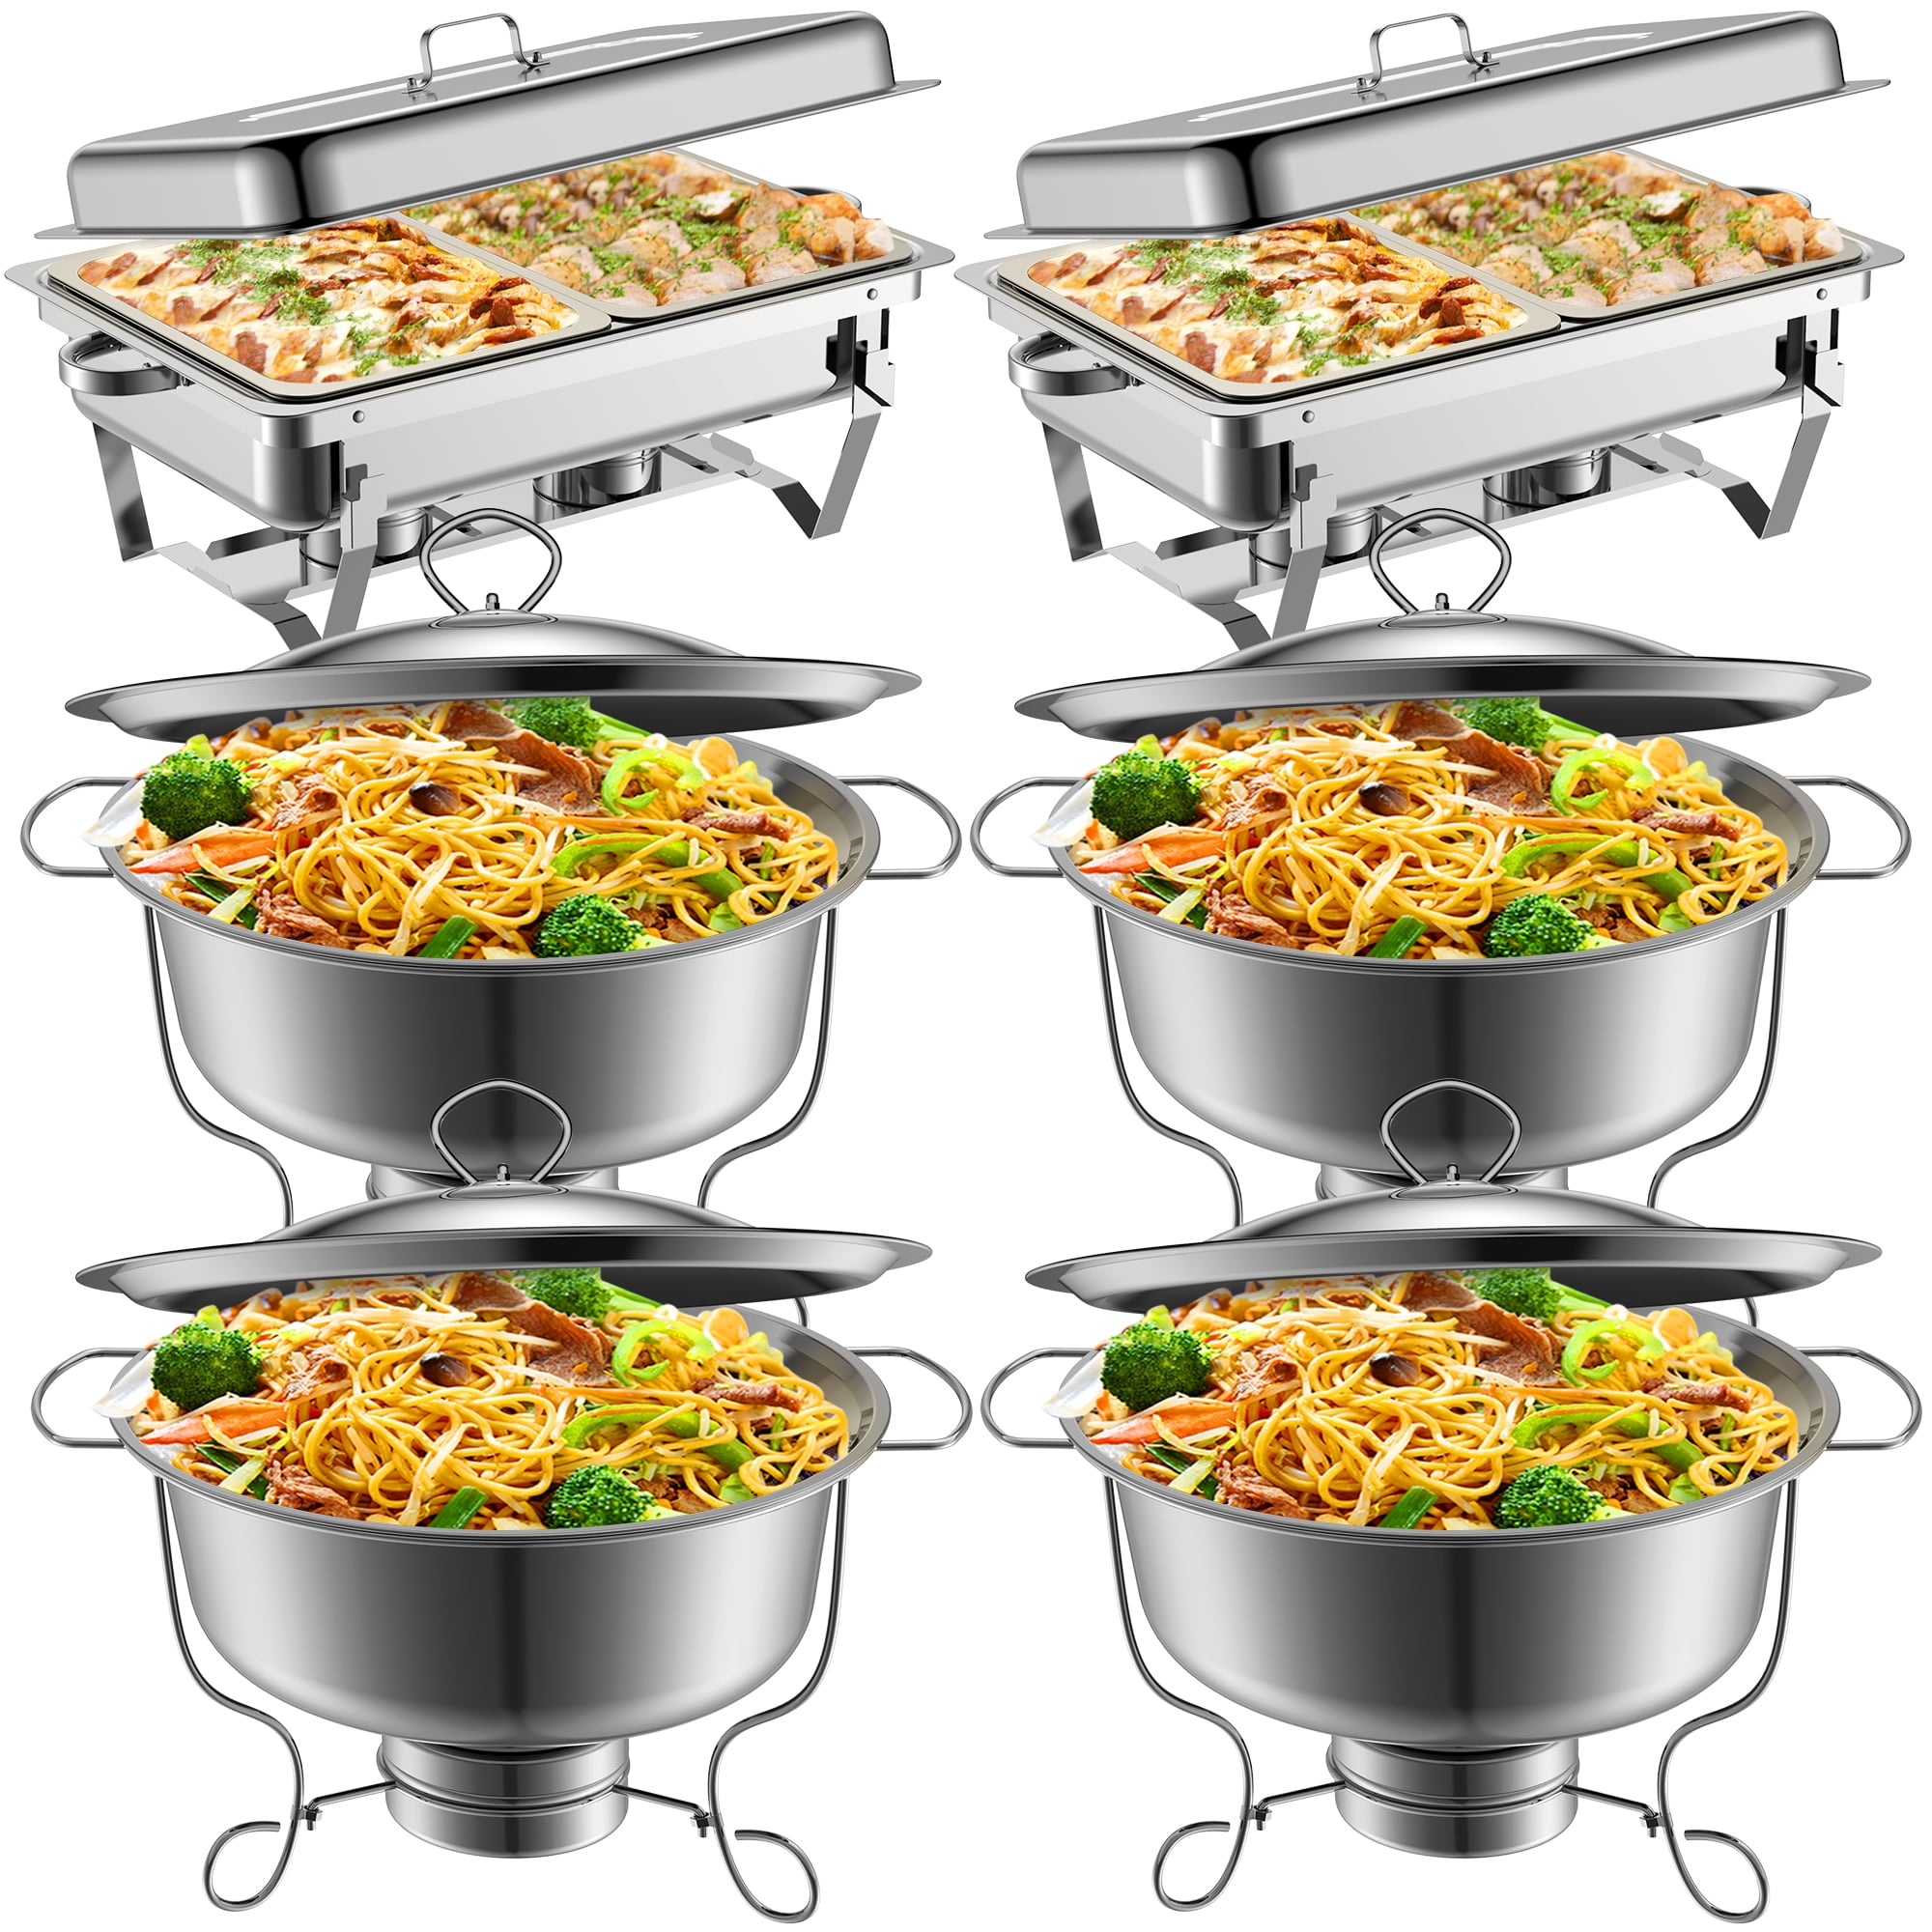 GRANDMA SHARK Chafing Dish Buffet Set, Food Warmers for Parties 2 Packs 8QT  Stainless Steel Rectangular Chafers and Buffet Warmer with Alcohol Furnace